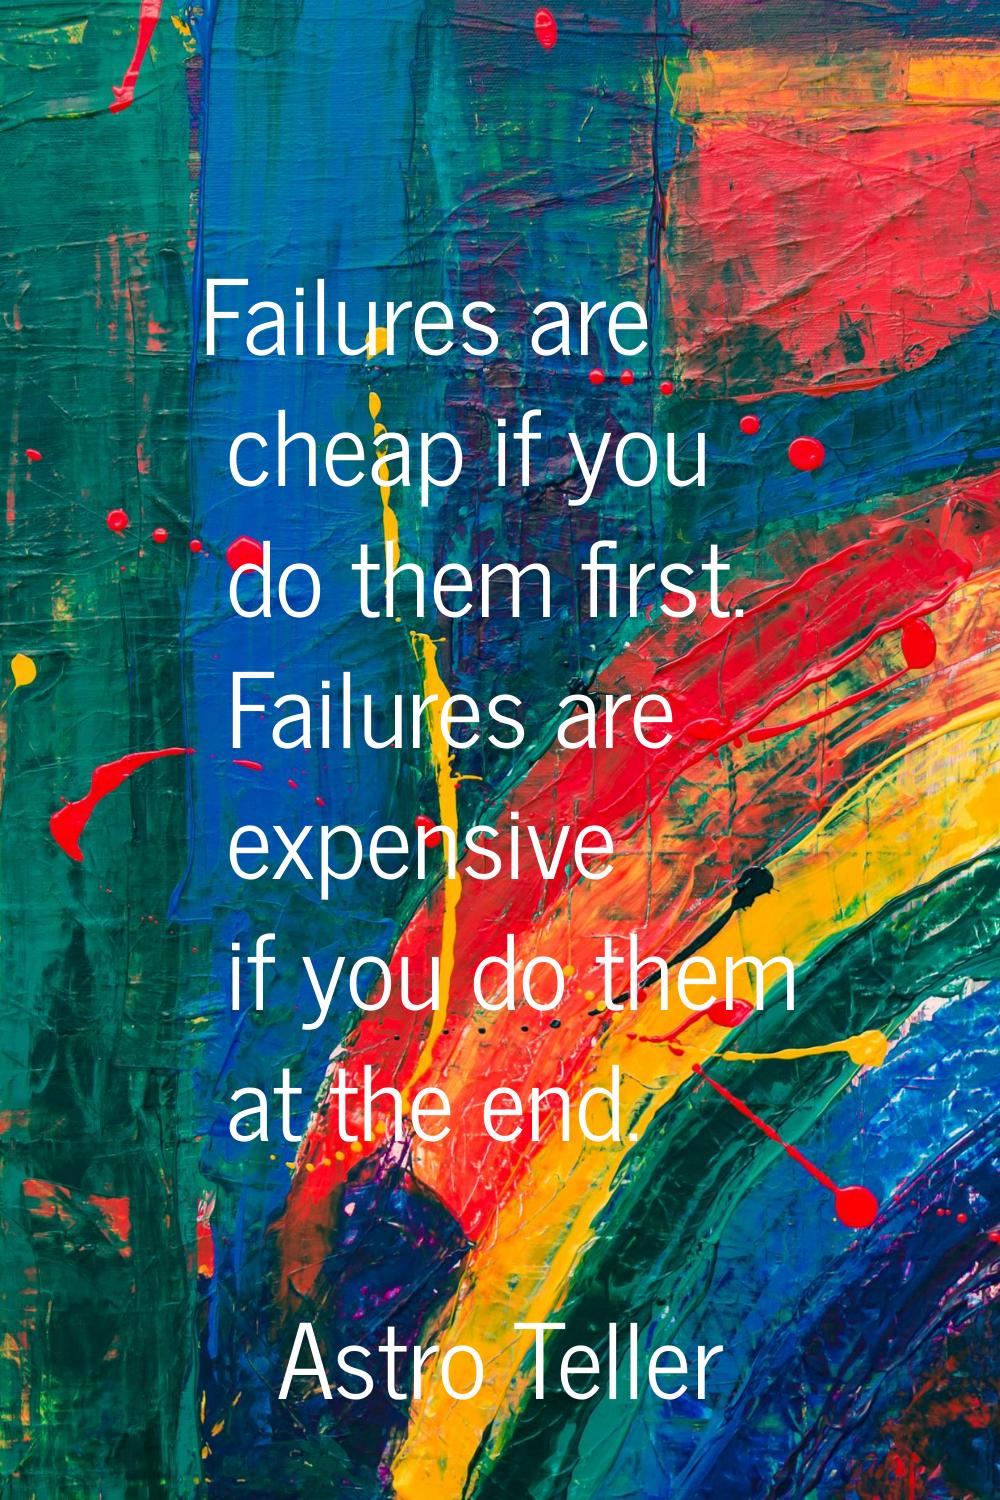 Failures are cheap if you do them first. Failures are expensive if you do them at the end.